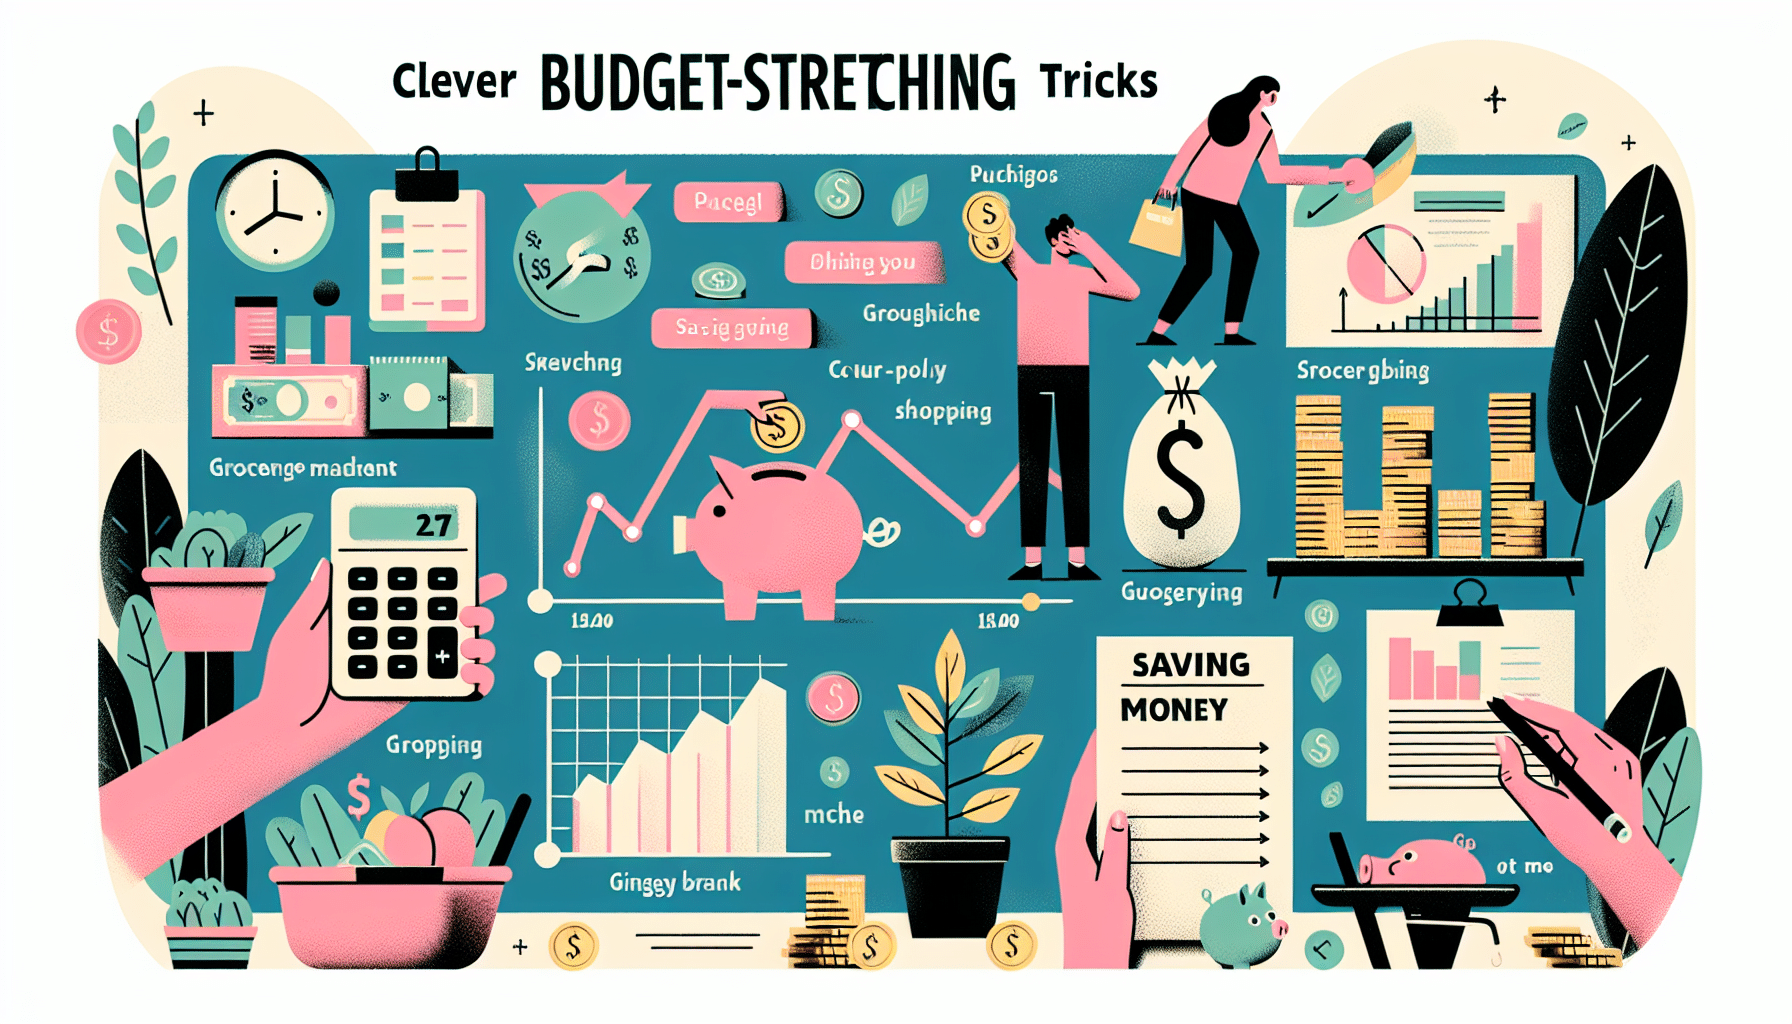 discover savvy tips and tricks to stretch your budget and make ends meet with our expert guidance.